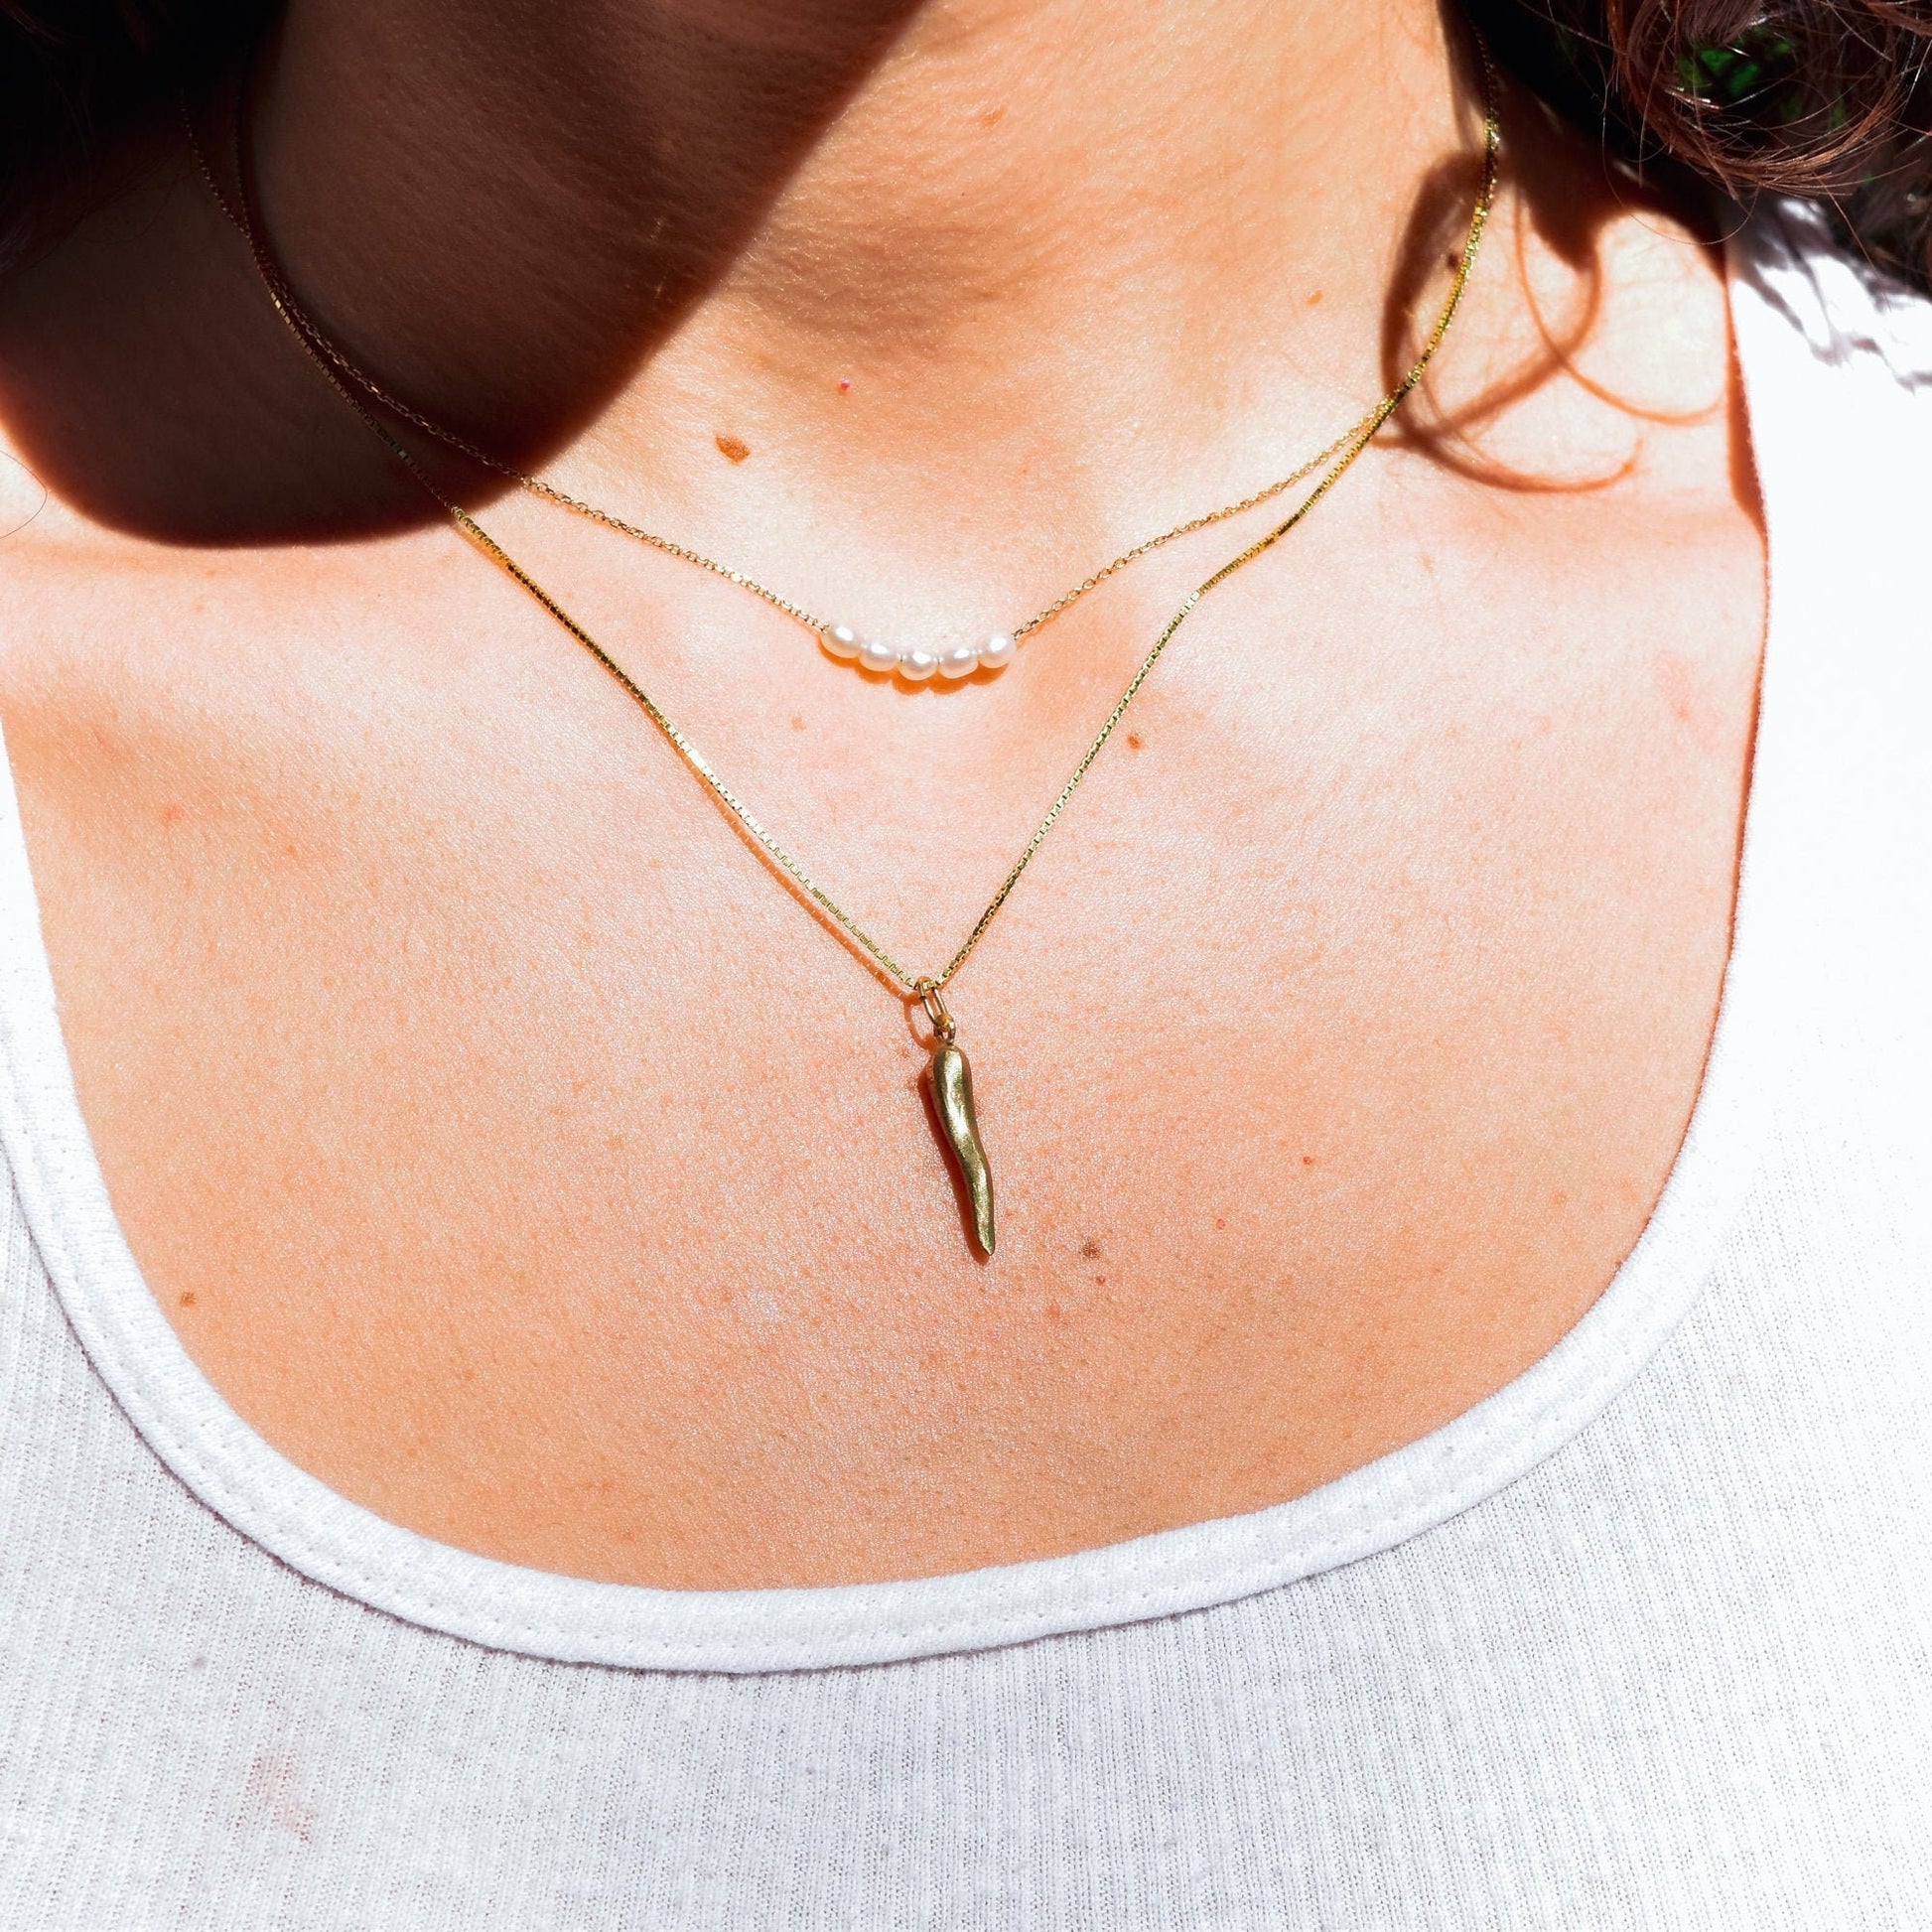 14K gold Italian horn necklace worn on woman's neck, mini brushed yellow gold cornicello pendant charm, vintage good luck amulet jewelry